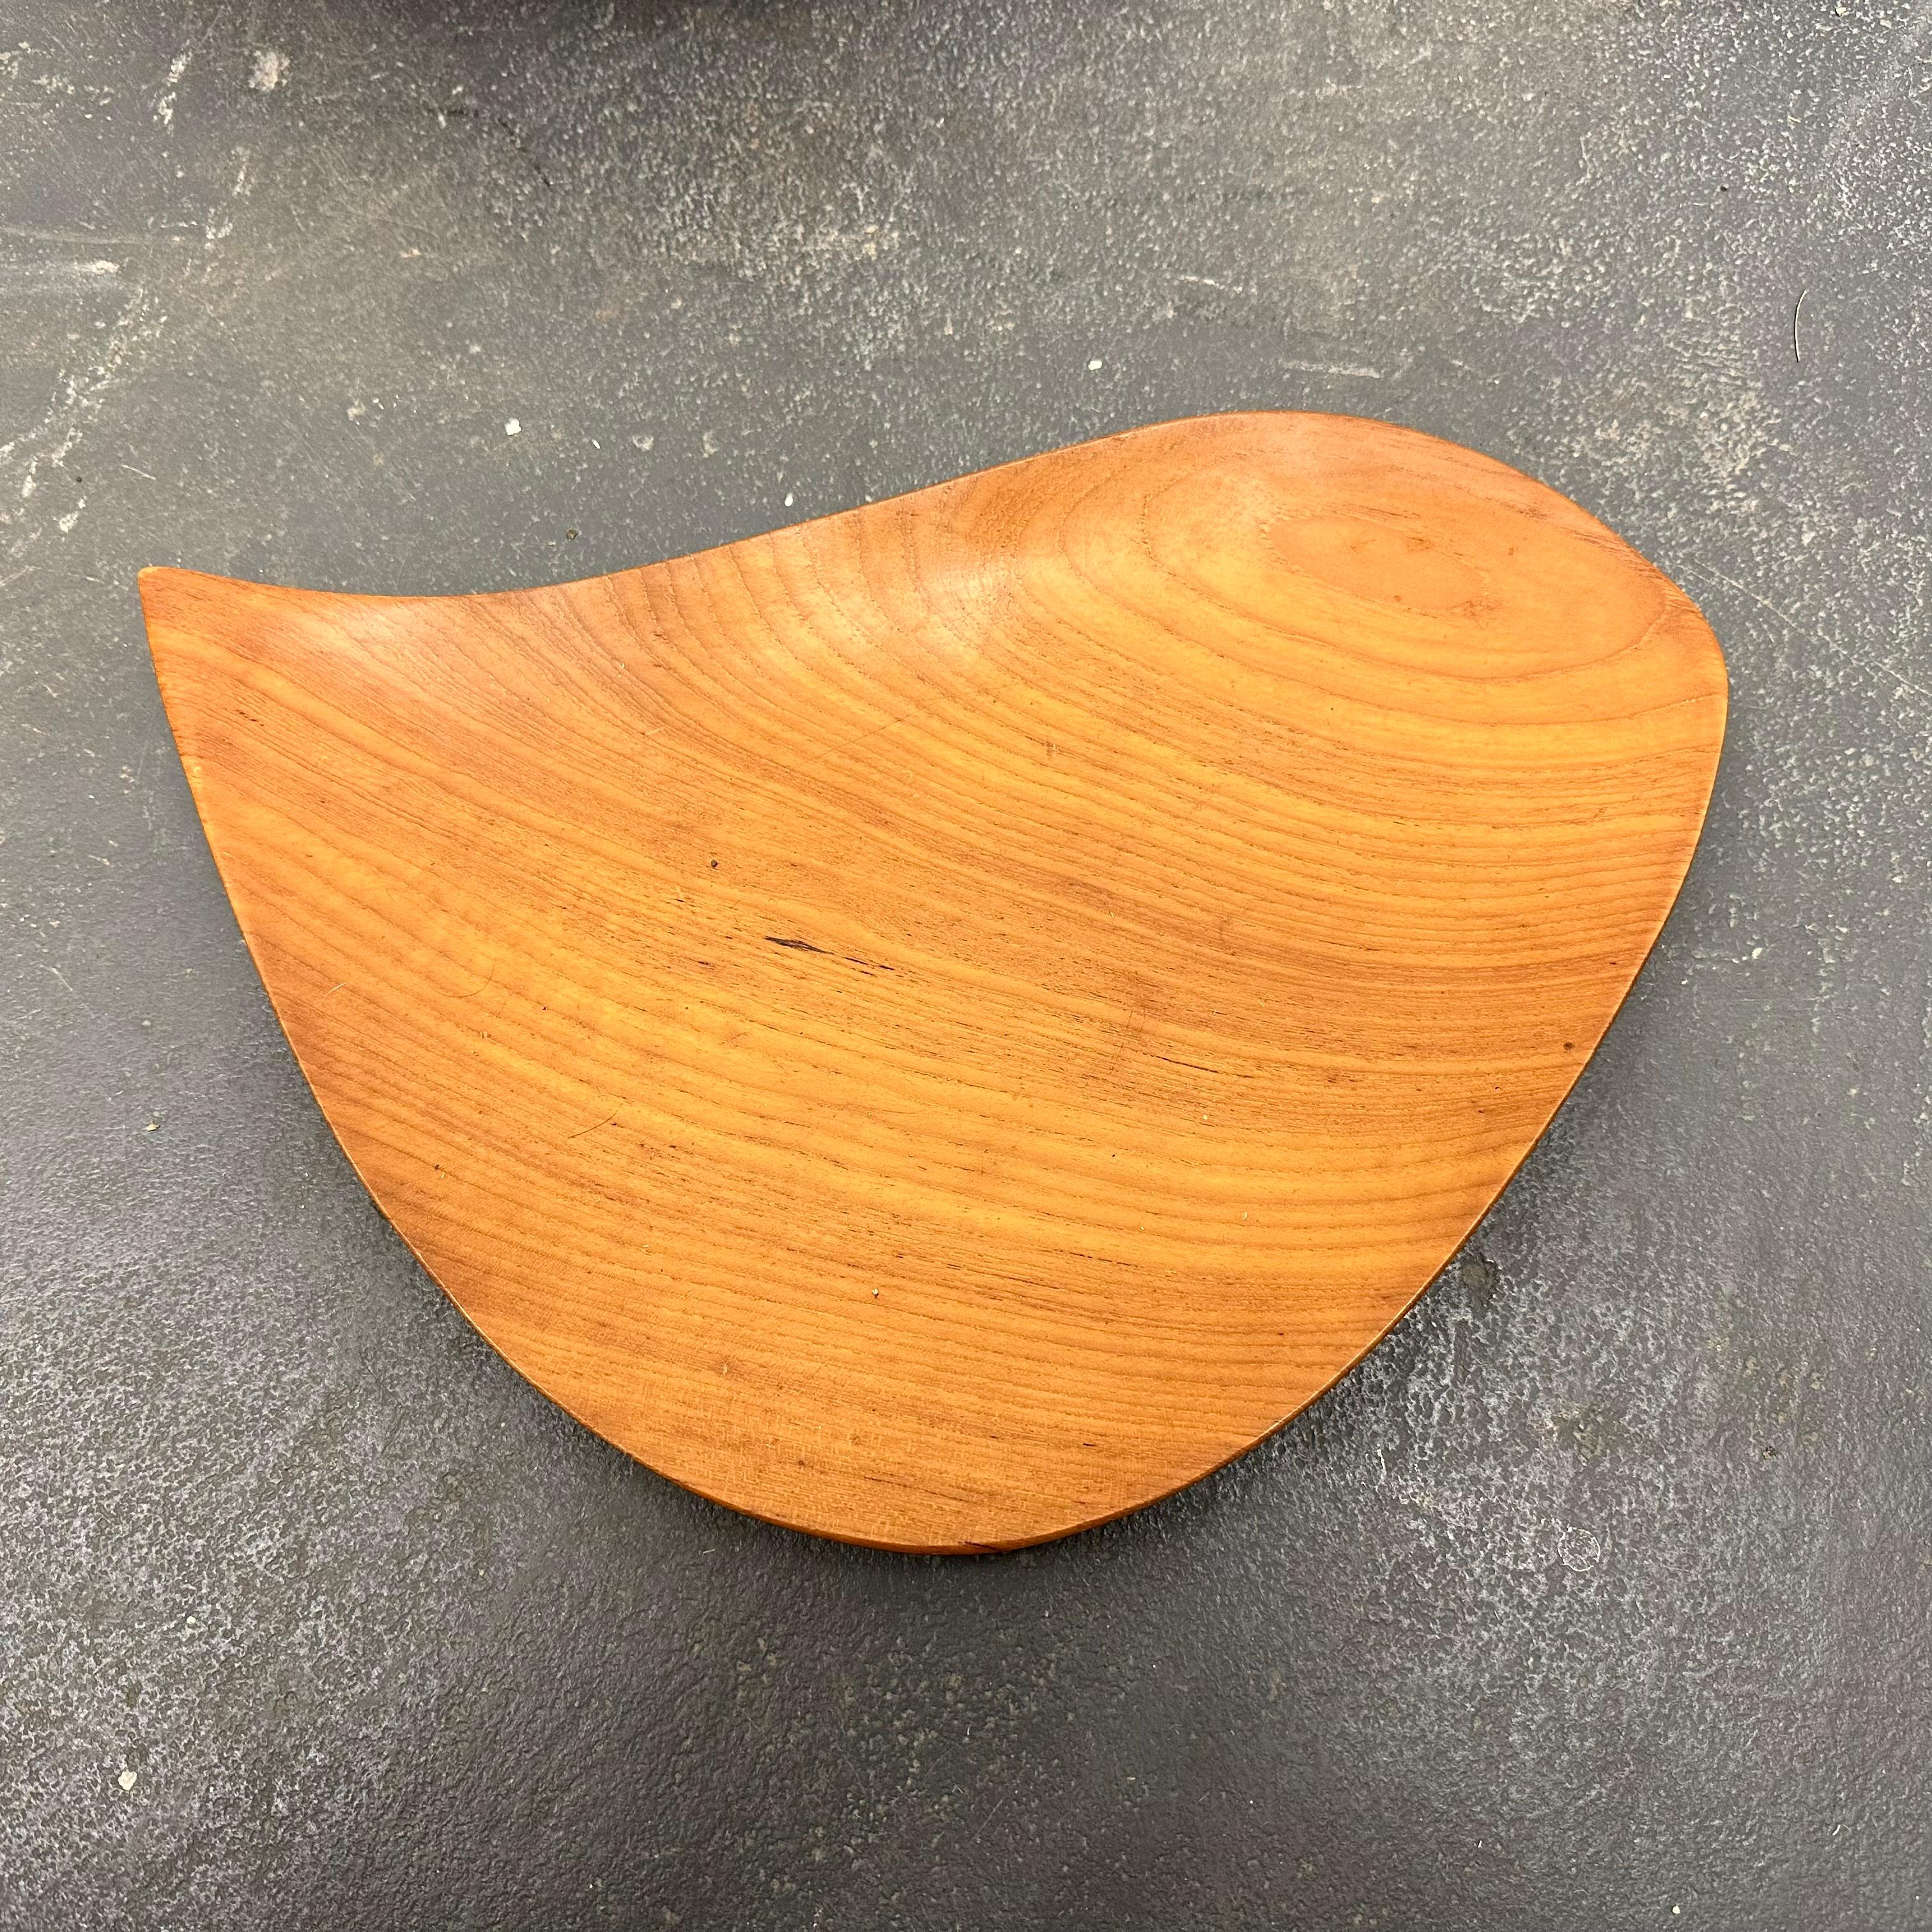 Four bowls available, one with a set of serving tongs, along with a small tray. The largest bowl is a rare example in solid Brazilian rosewood, and measures over 25